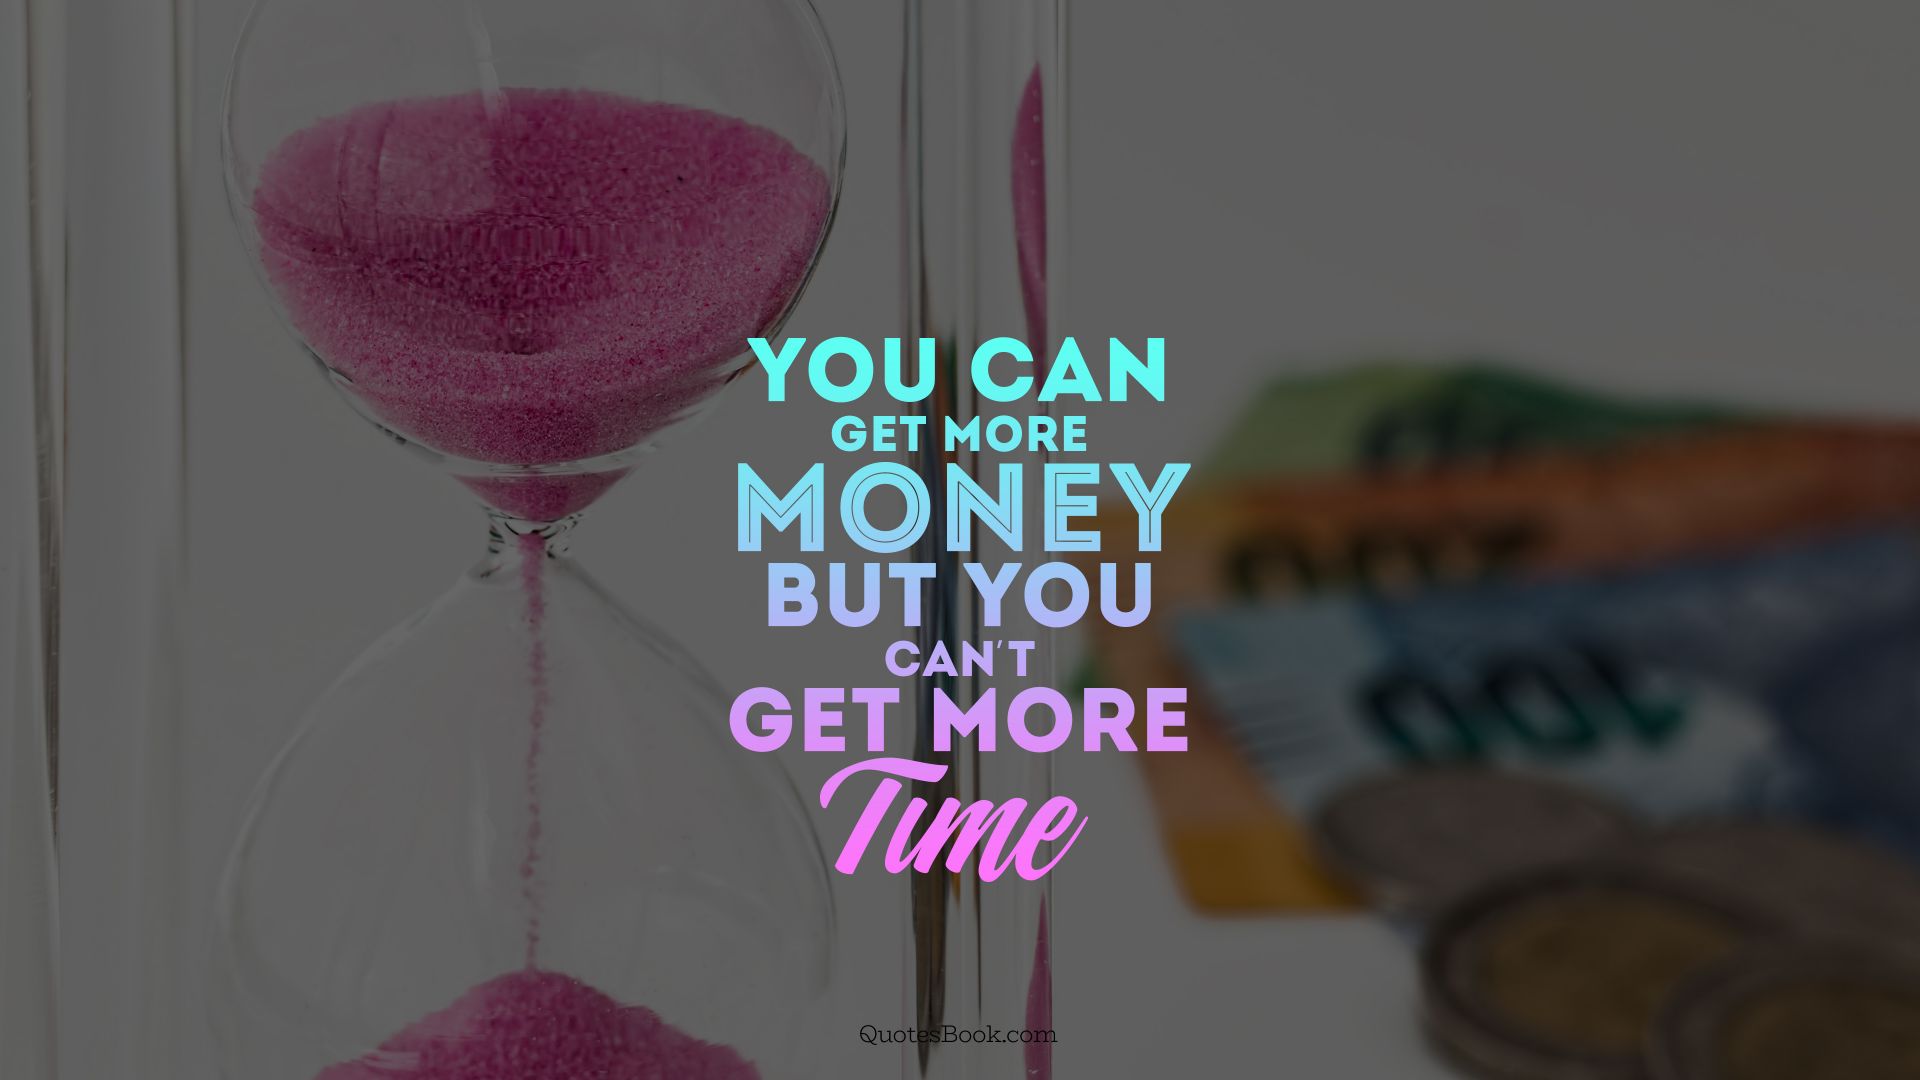 You can get more money but you can't get more time